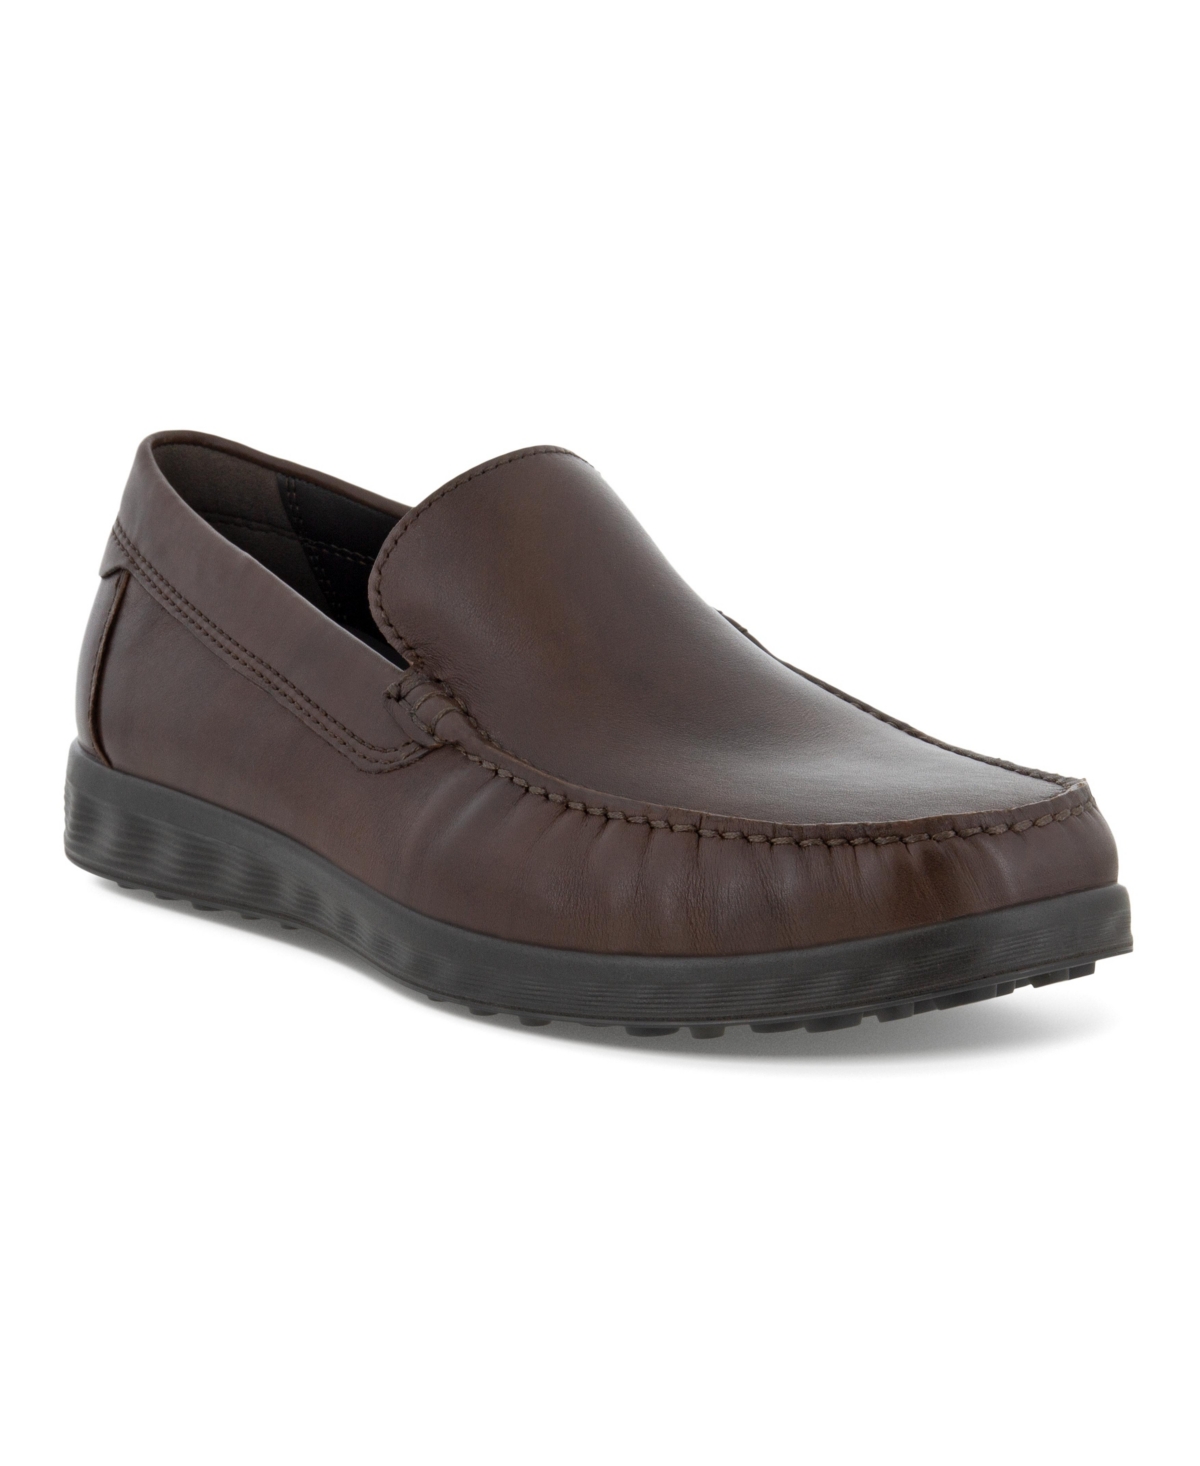 Men's S Lite Classic Leather Slip-On Moccasin - Cocoa Brown